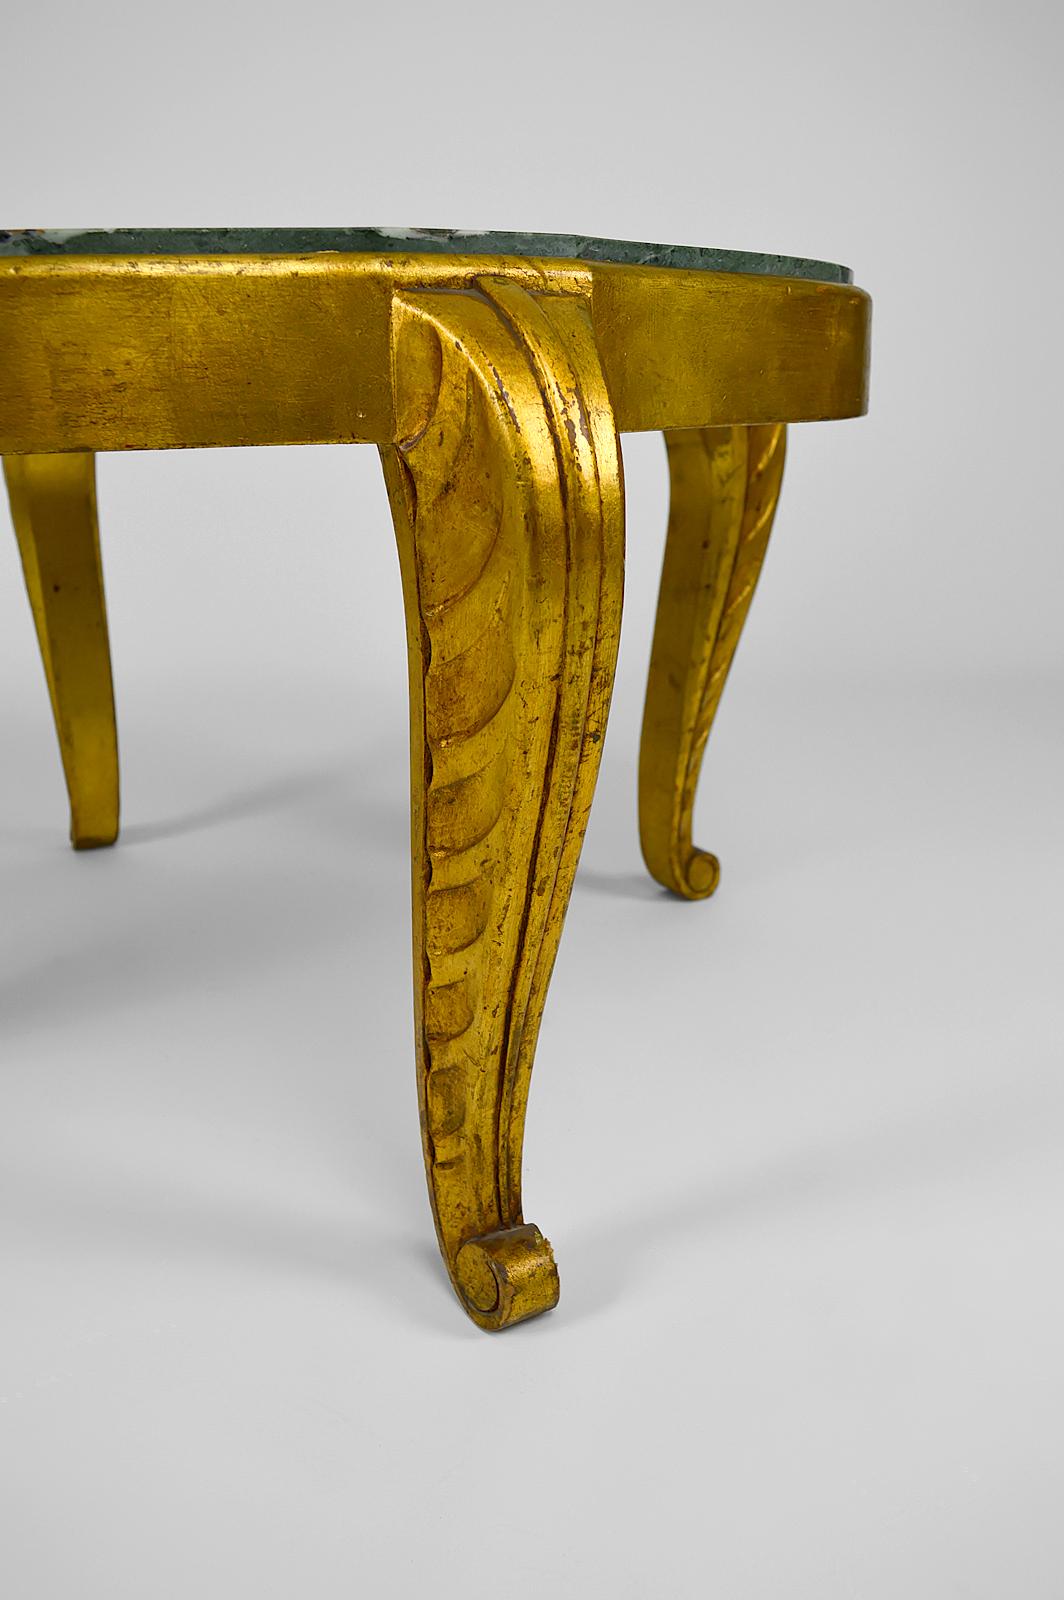 Gilded Side Table with Marble Top by Maison Jansen, Neoclassical Art Deco, 1940s For Sale 9